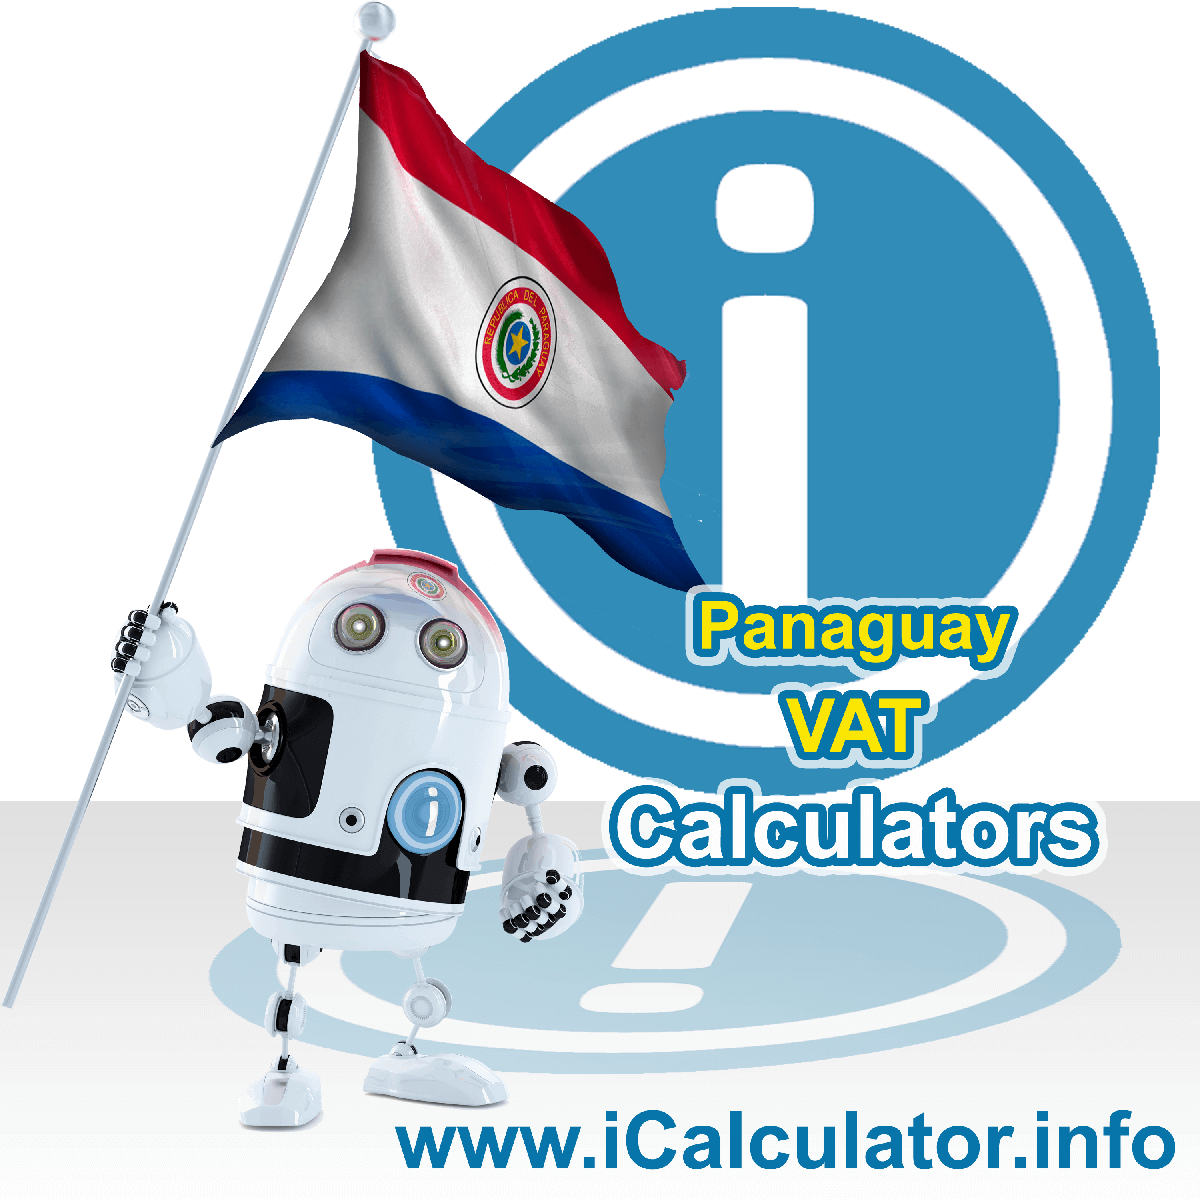 Paraguay VAT Calculator. This image shows the Paraguay flag and information relating to the VAT formula used for calculating Value Added Tax in Paraguay using the Paraguay VAT Calculator in 2023